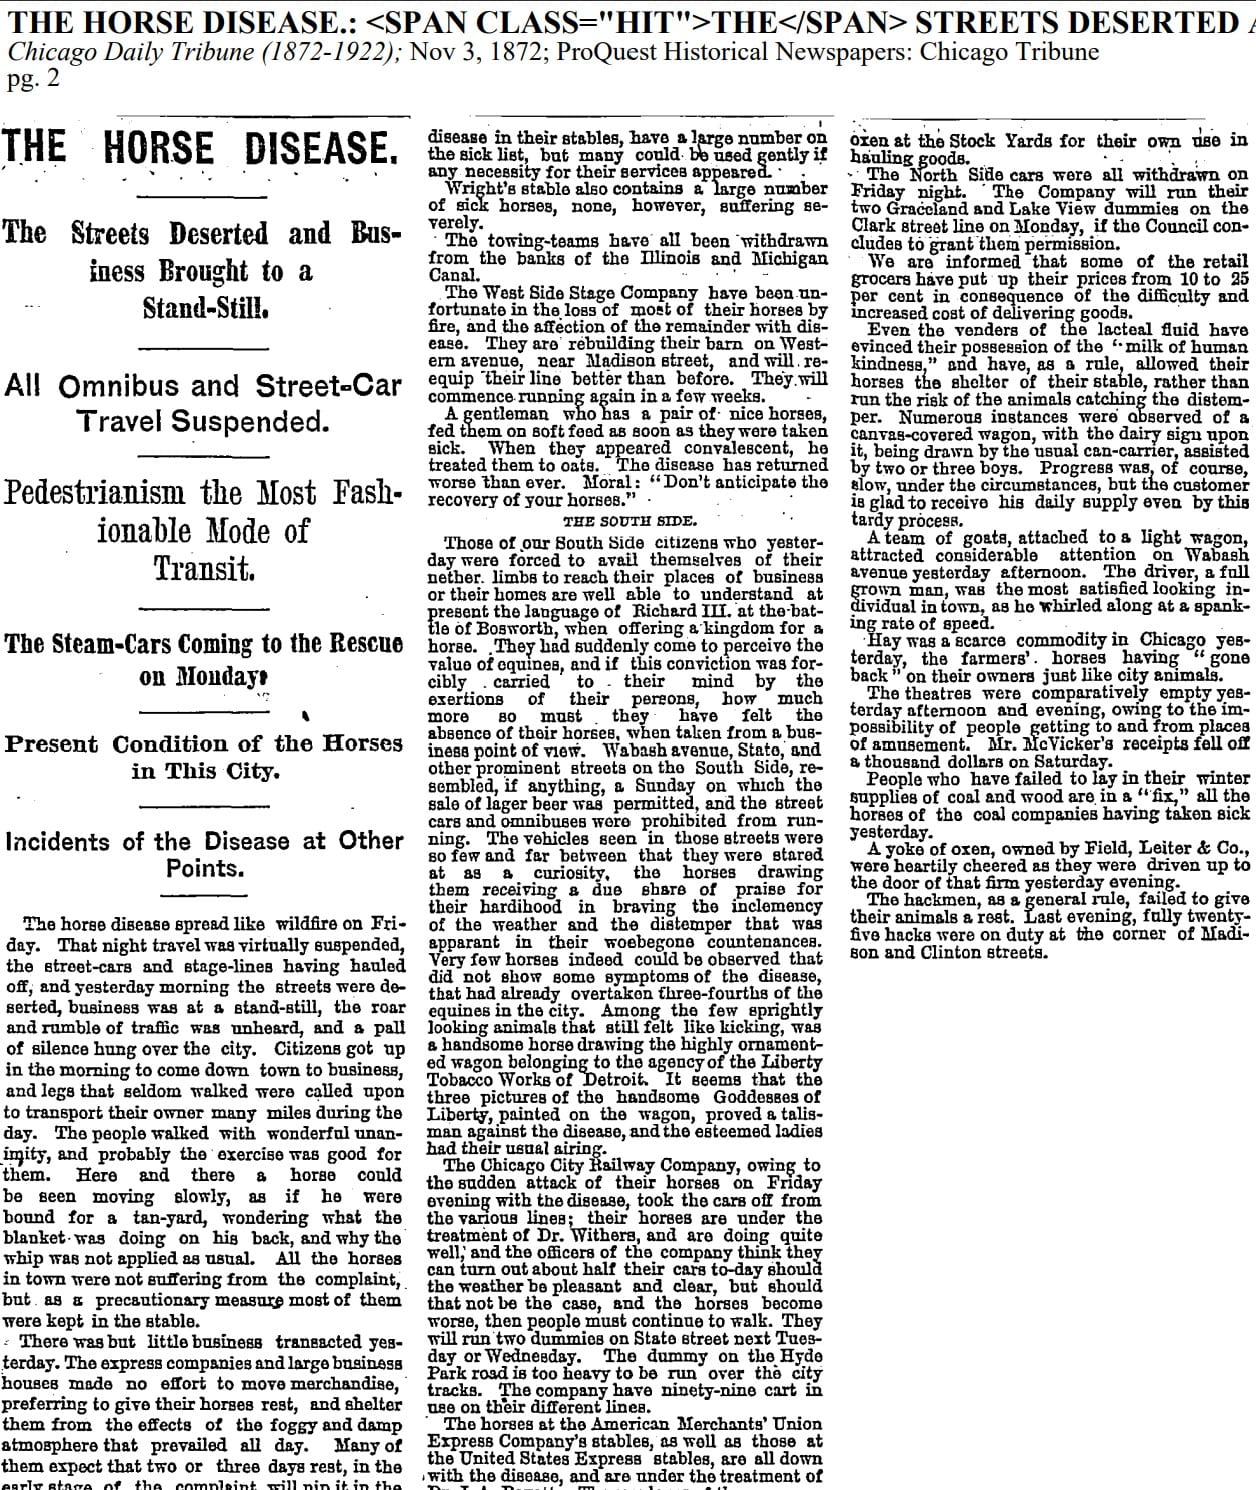 The Horse Disease, Chicago Daily Tribune, 1872.